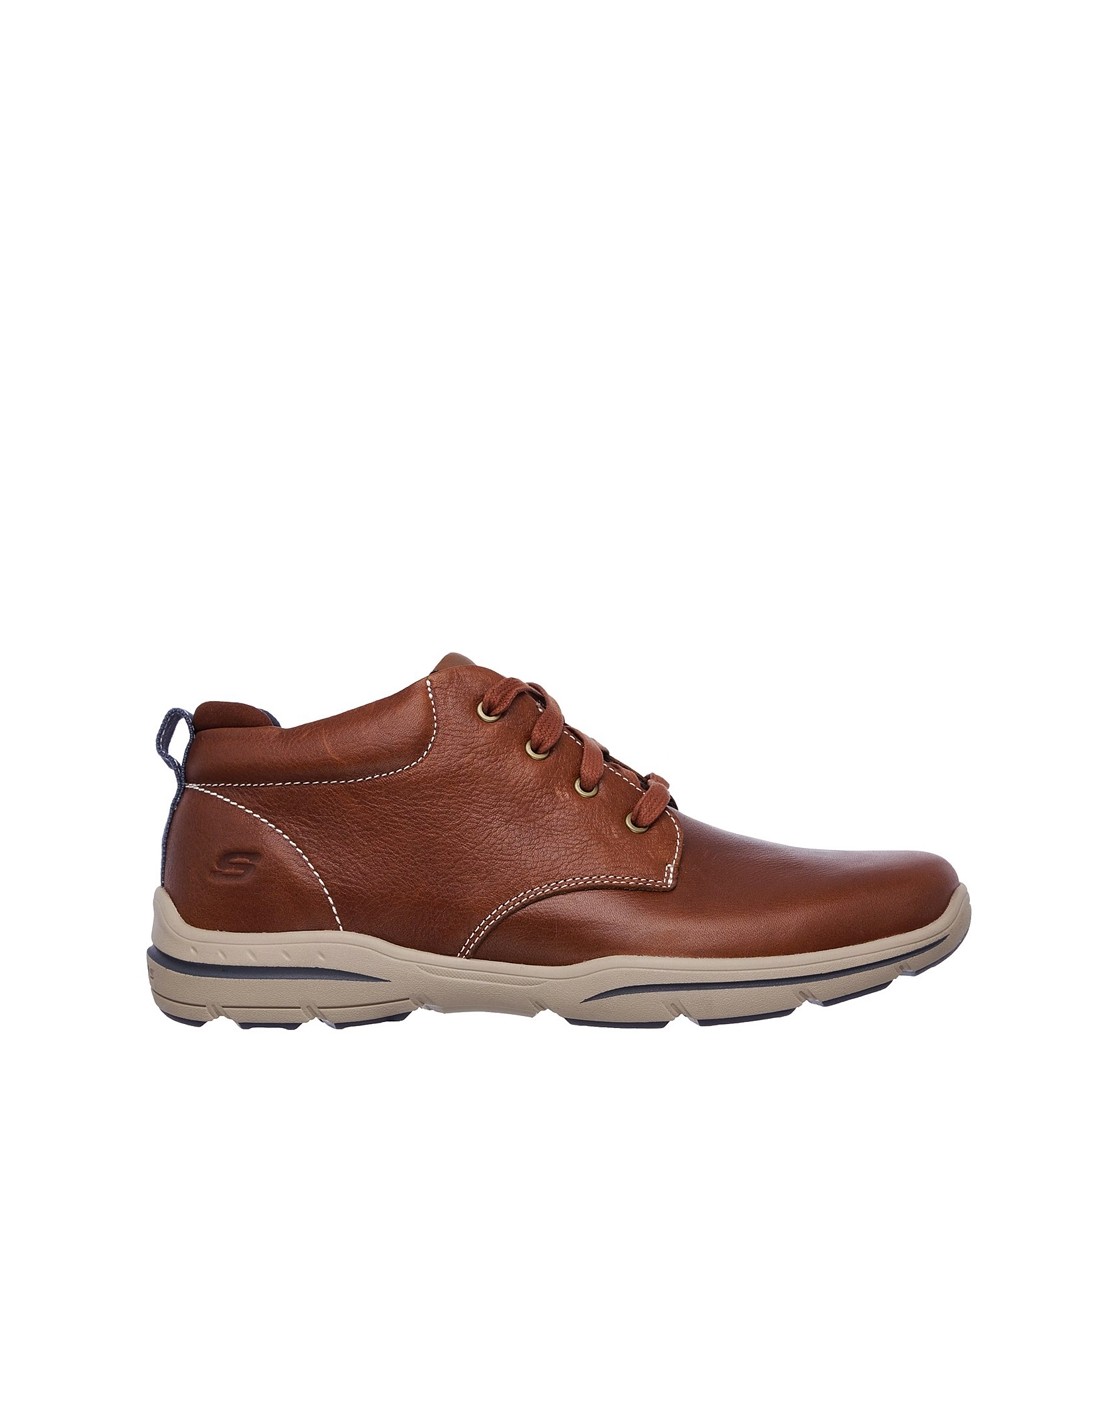 skechers relaxed fit hombre dorados